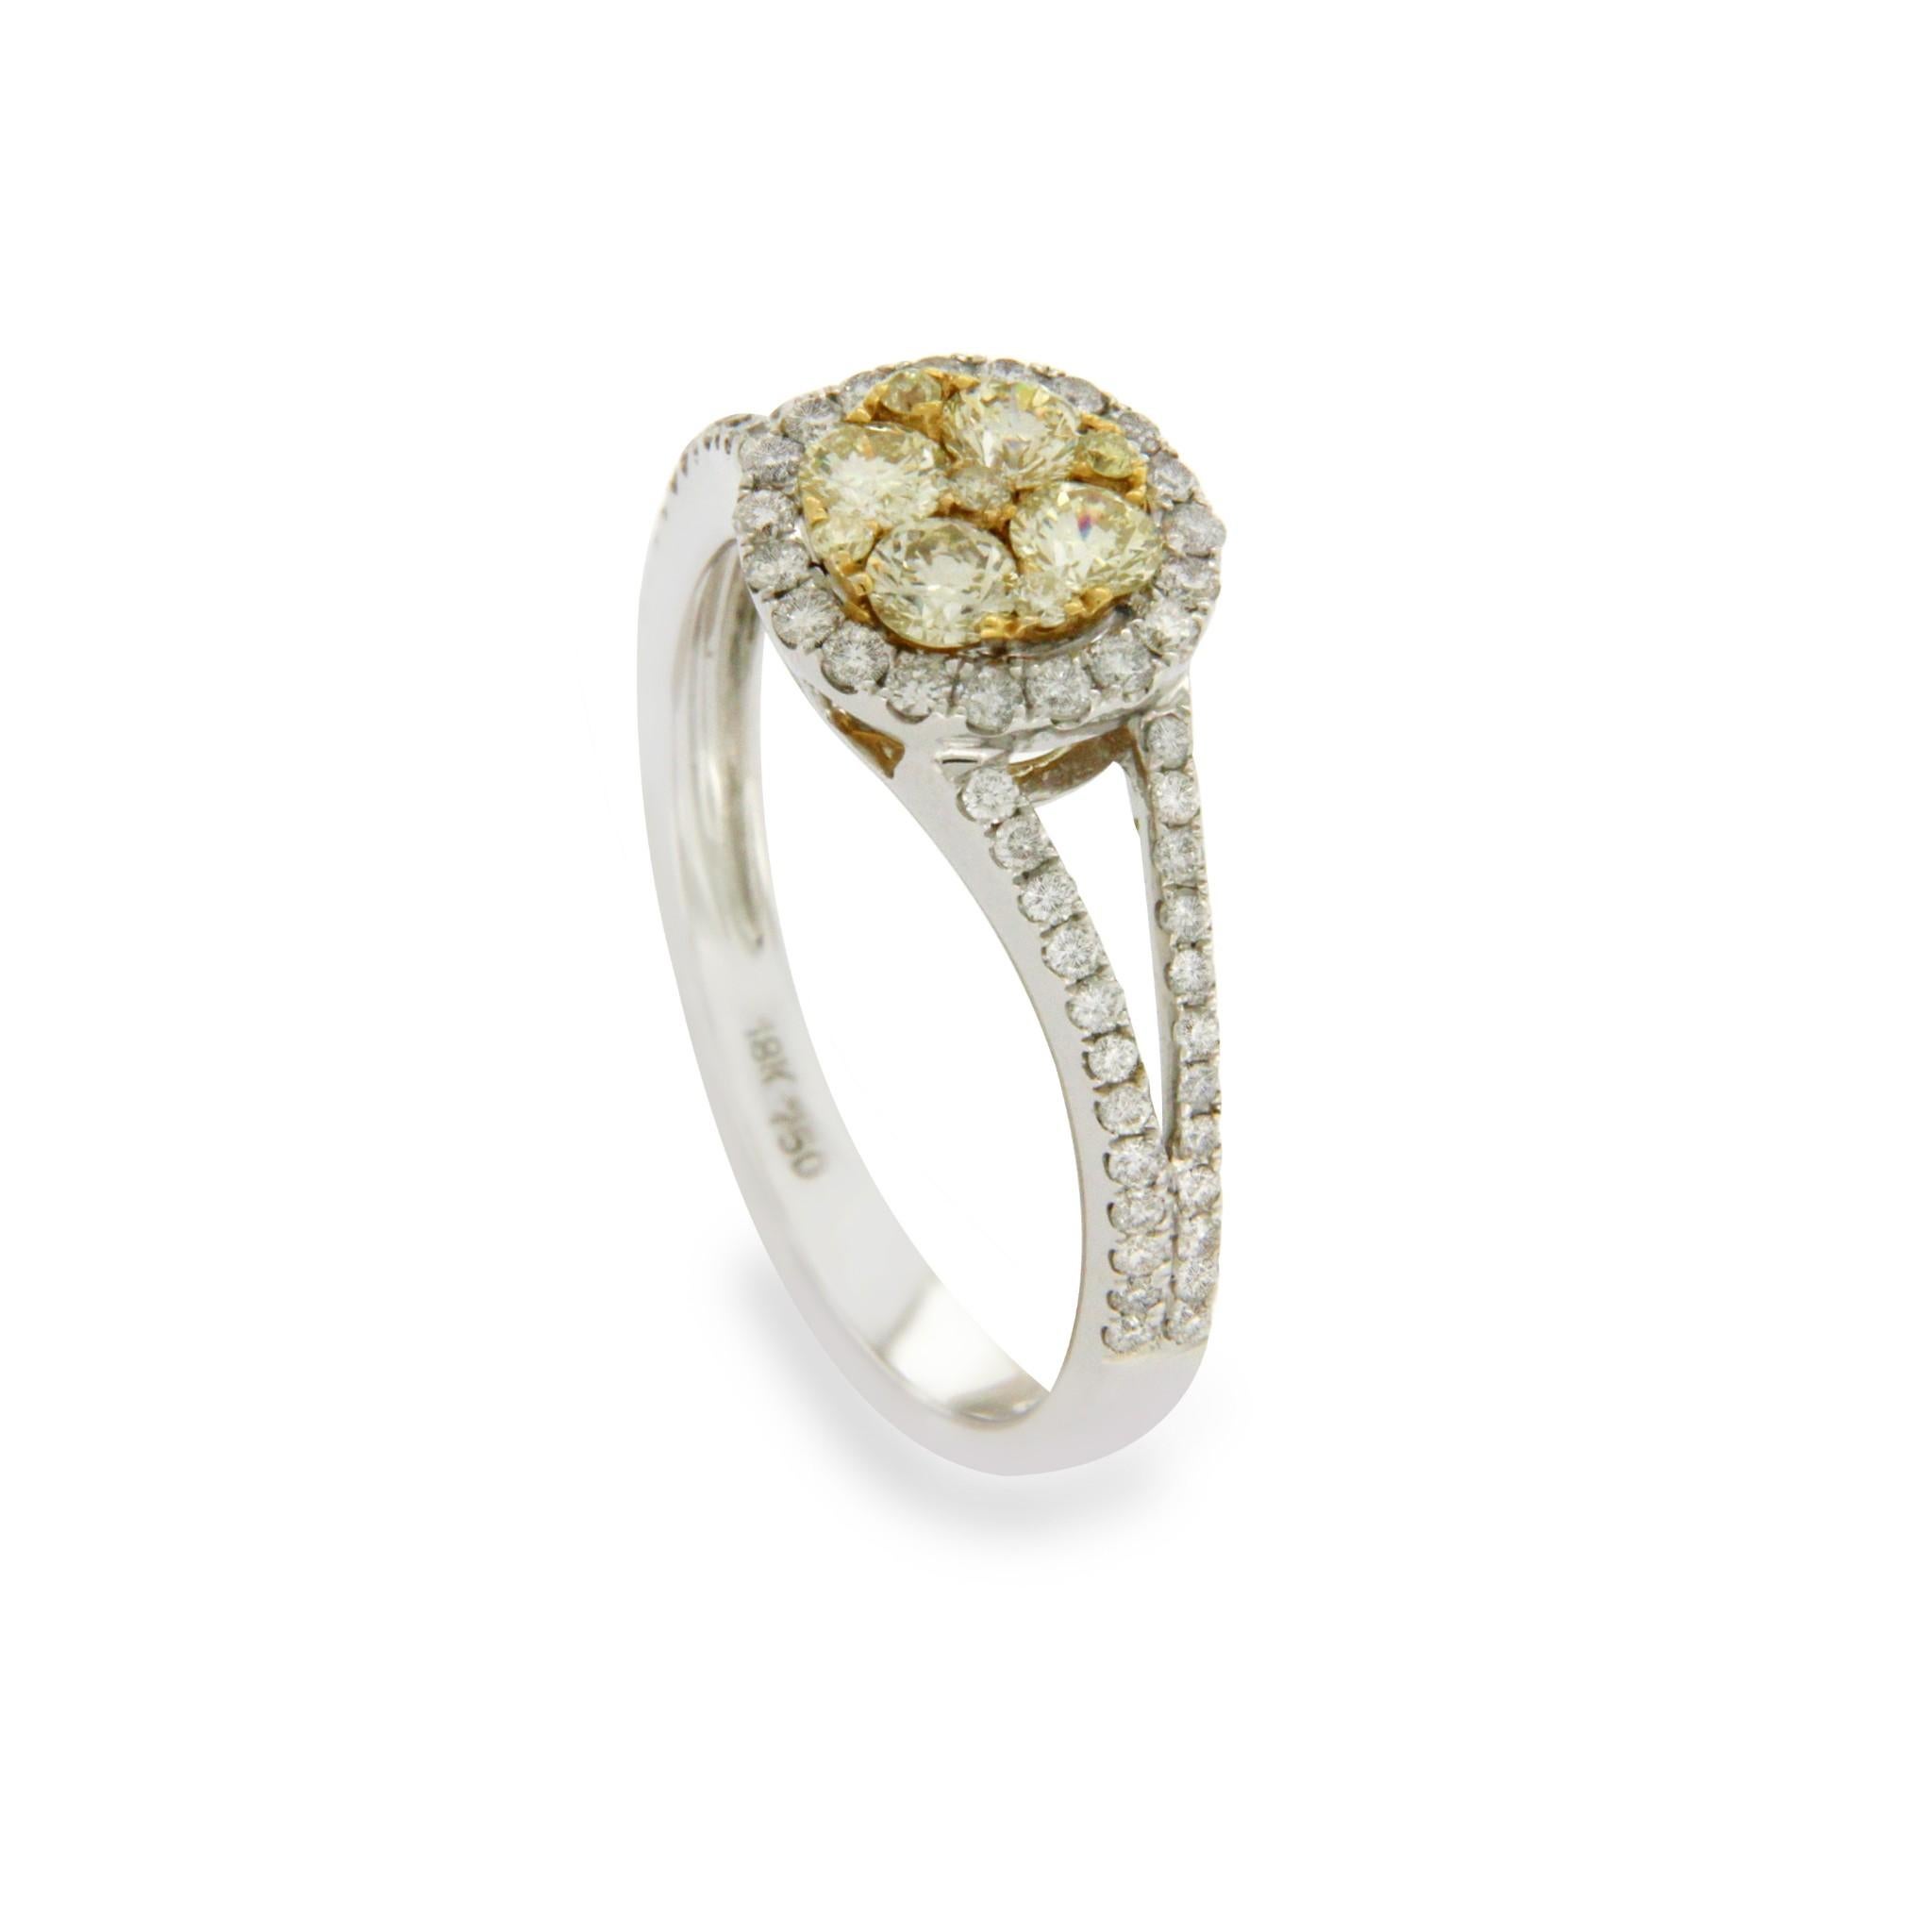 18 Karat White Gold 0.82 Carat Yellow and White Diamonds Engagement Ring In Excellent Condition For Sale In Los Angeles, CA